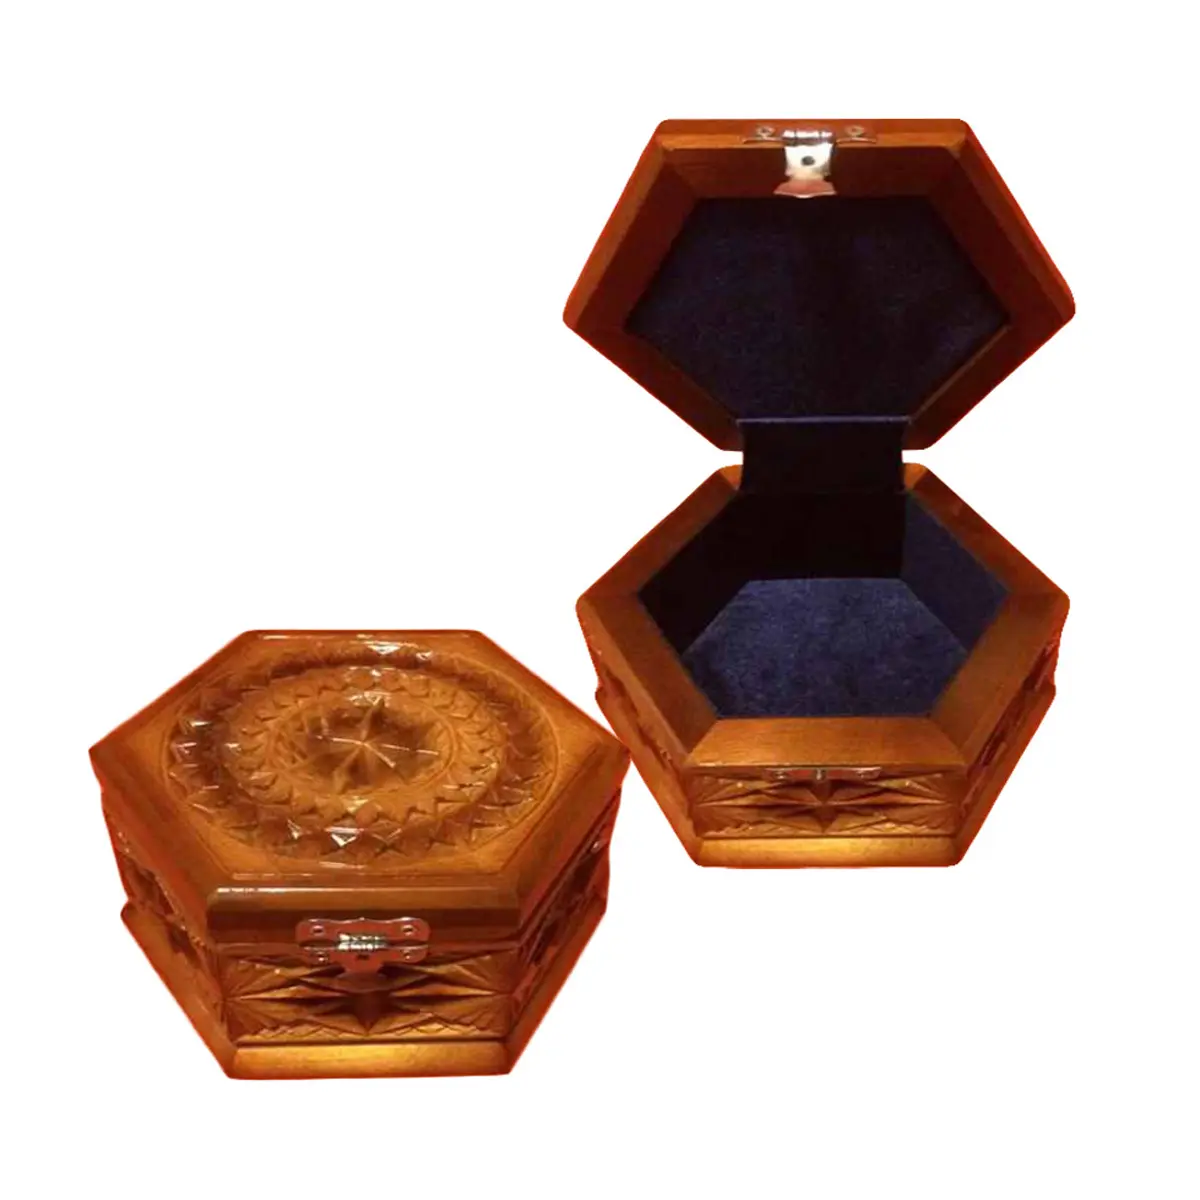 Classic carved jewelry box made of precious wood hard and light wood memorable gift for family and friends